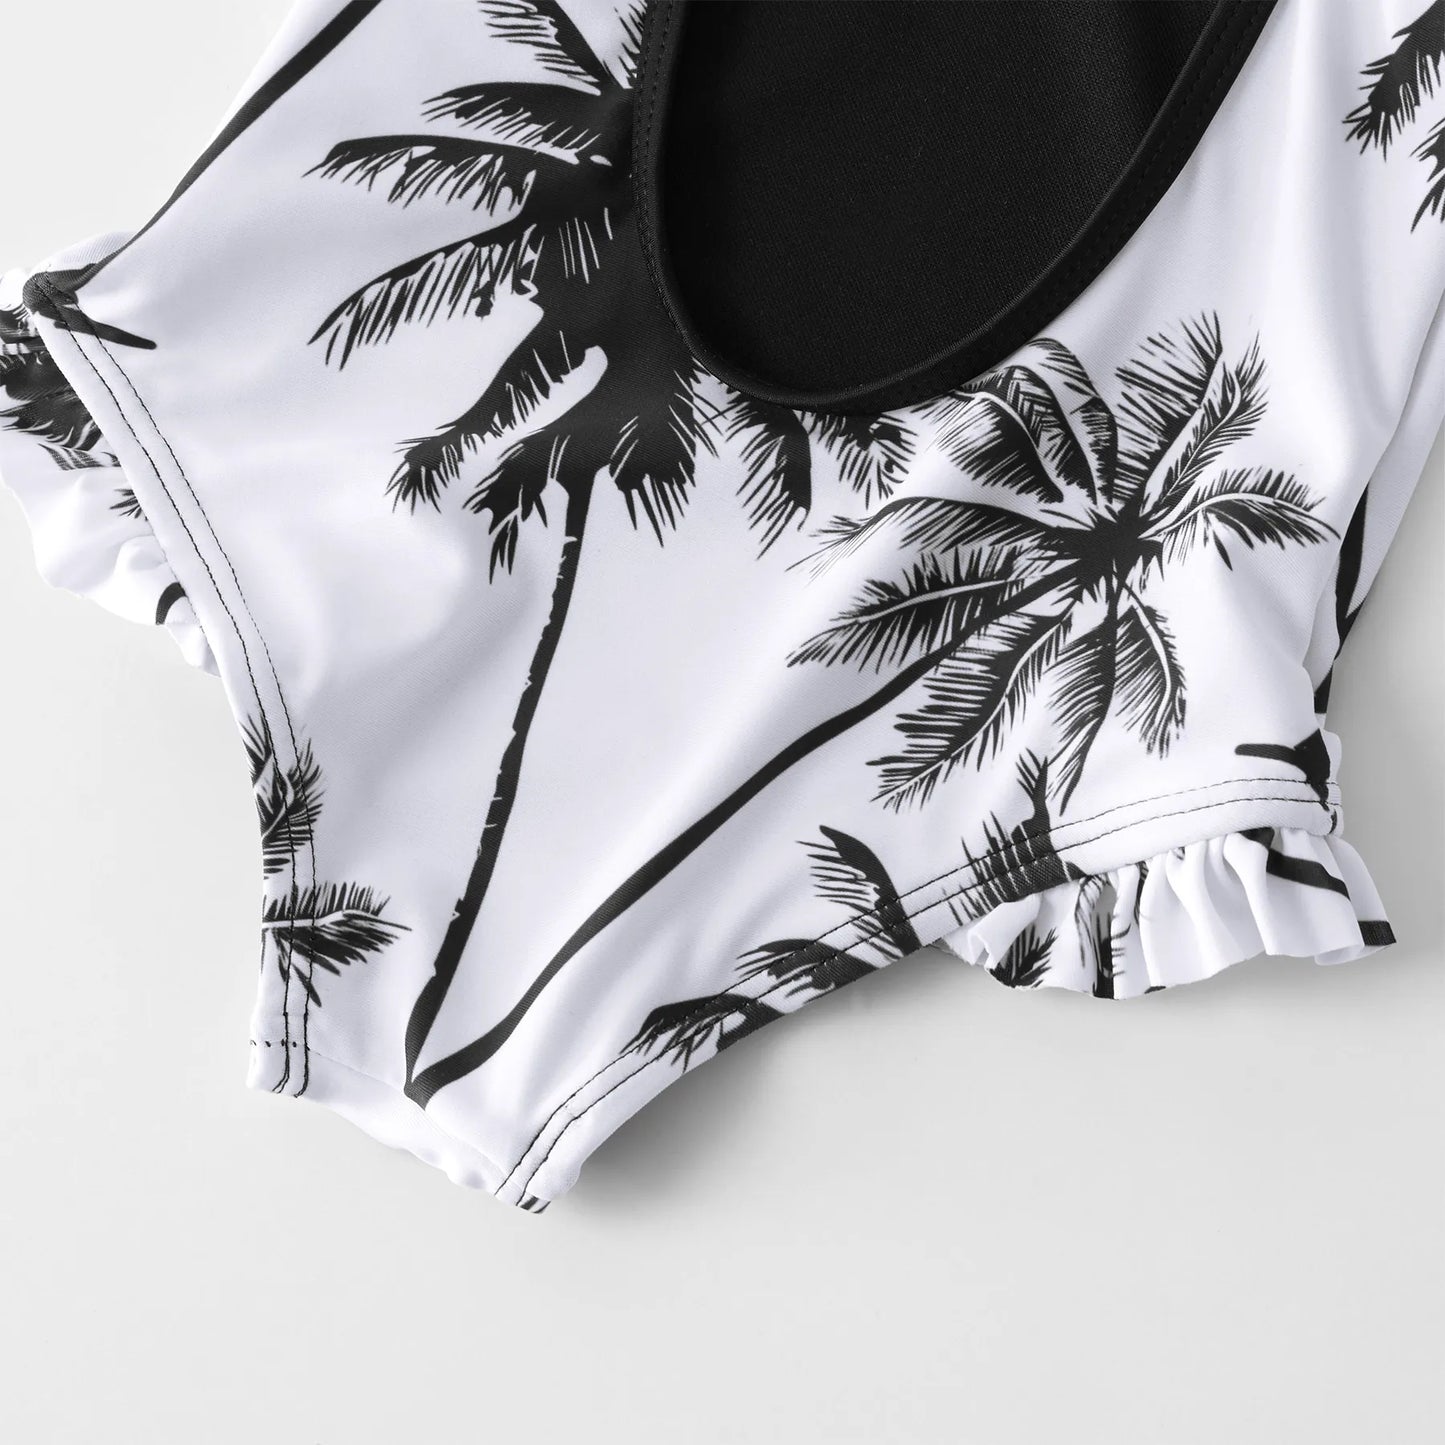 Family Matching! Black & White Palm Tree One Piece Swimsuits & Trunks